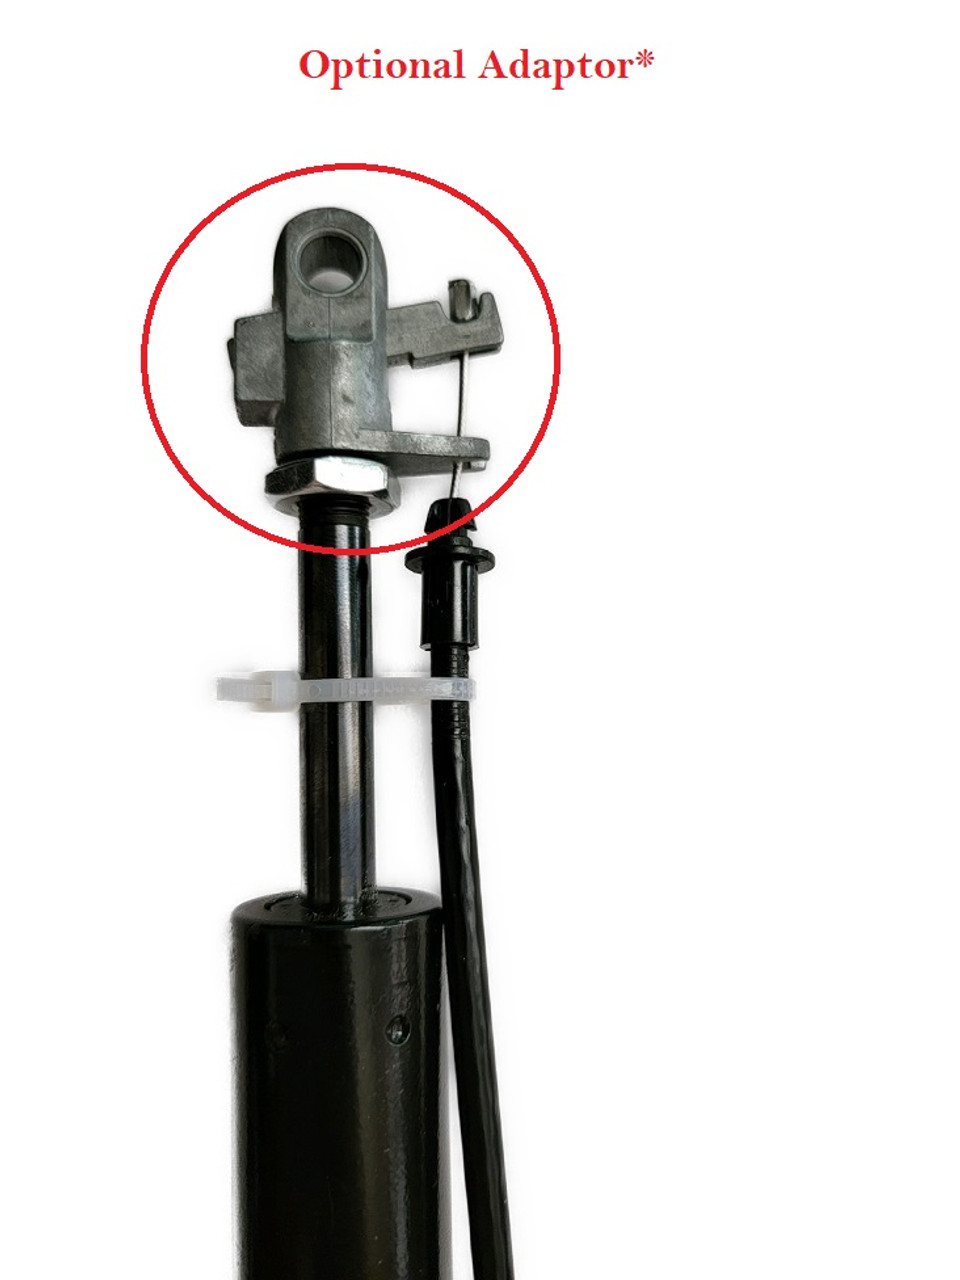 Looking for Chattanooga FX Flexion Table Gas Breakaway Cylinder, Chattanooga FX Flexion Table Gas Breakaway Cylinder for sale,  Chattanooga Flexion Table Gas Breakaway Cylinder, Chattanooga FX Table Gas Breakaway Cylinder, Chattanooga FX Flexion Table Breakaway Cylinder, Chattanooga FX Cylinder, FX Cylinder, FX Table Cylinder?